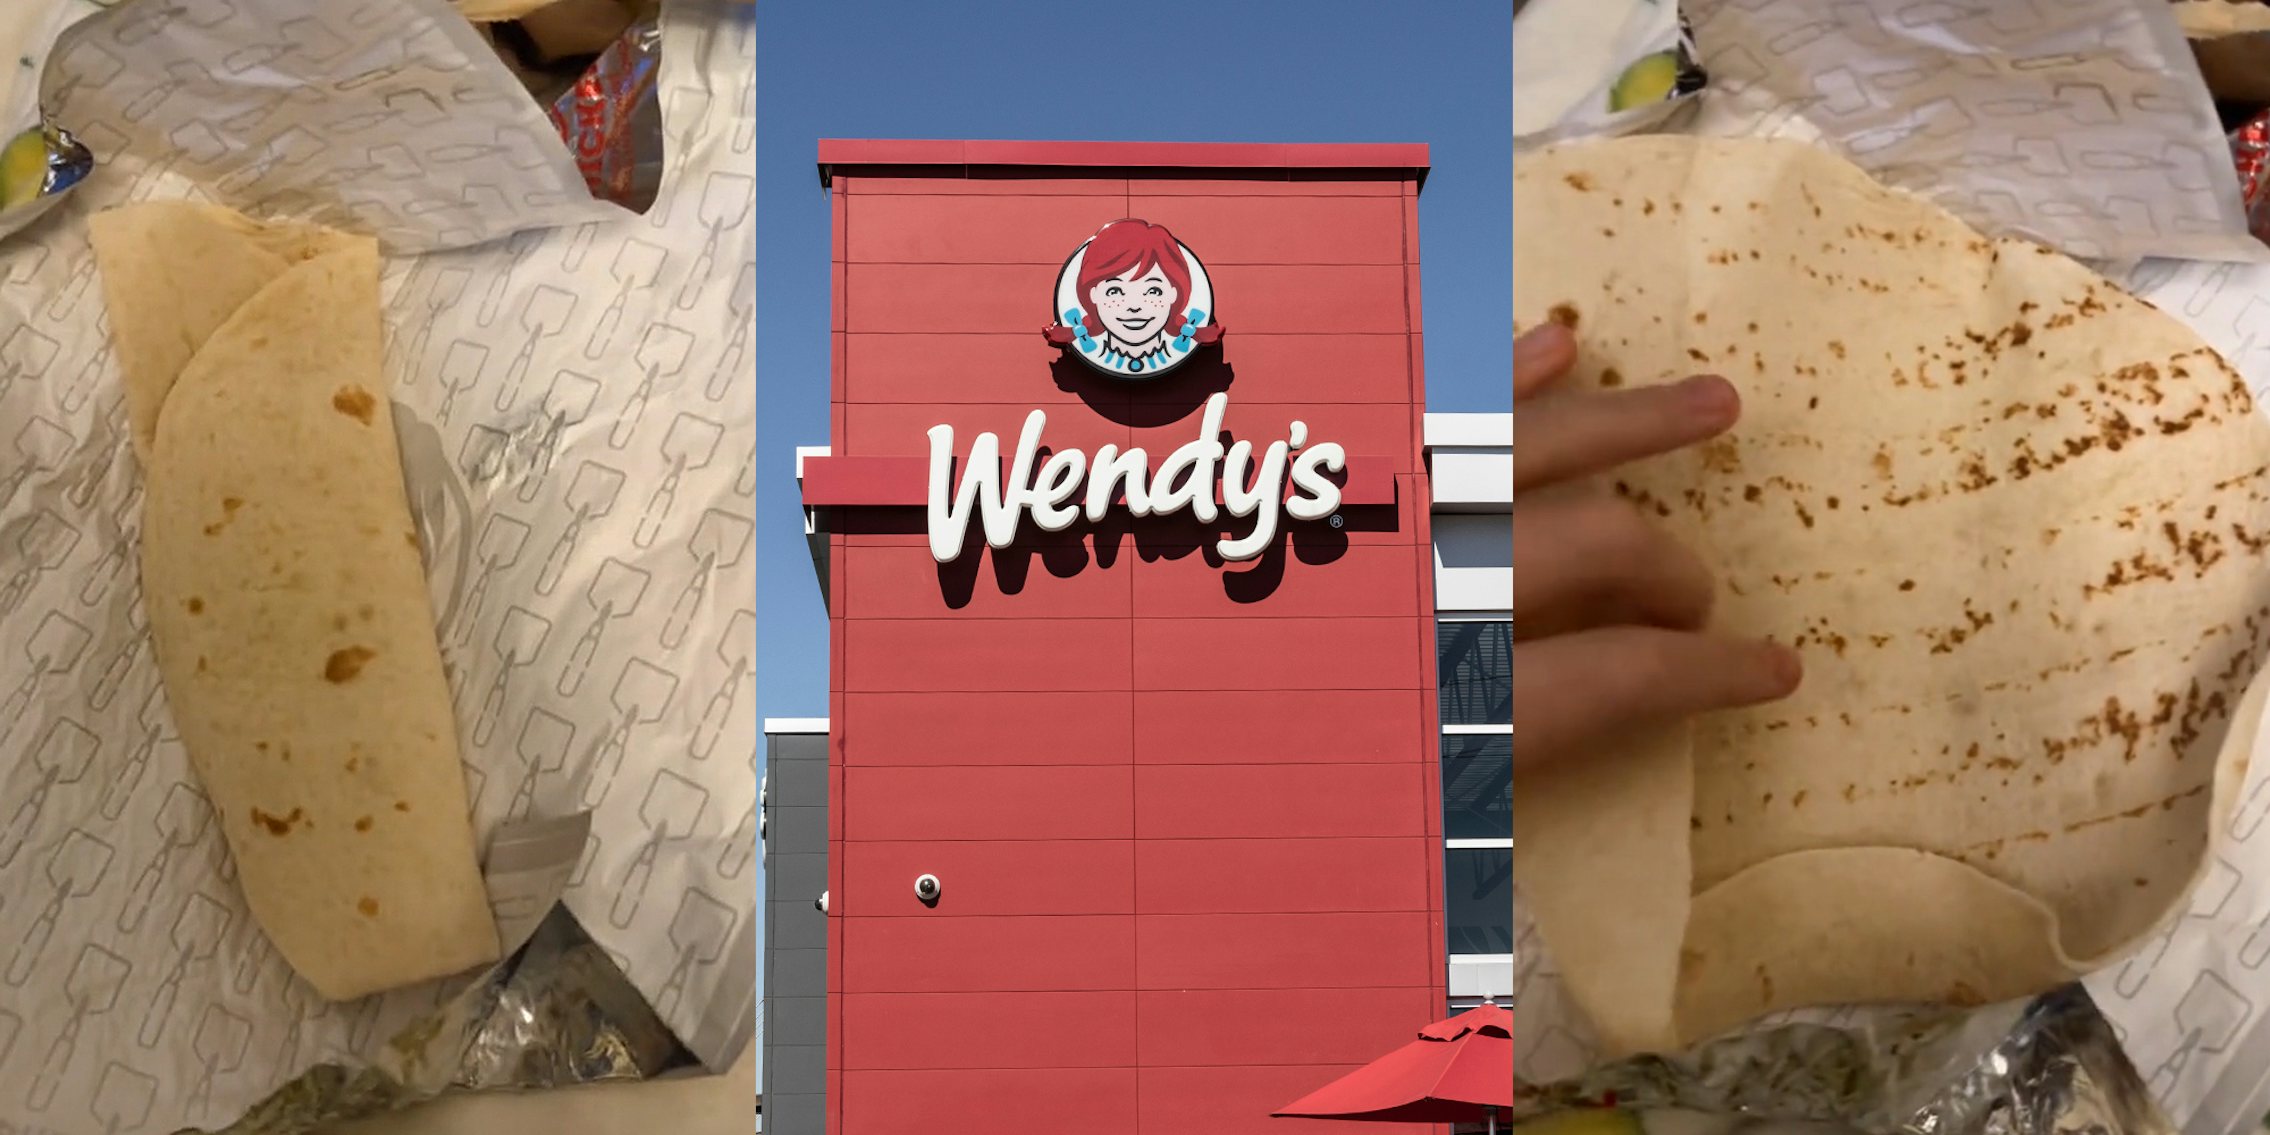 tortilla on wrapper (l) Wendy's building with sign and blue sky (c) hand unwrapping tortilla to reveal nothing inside (r)